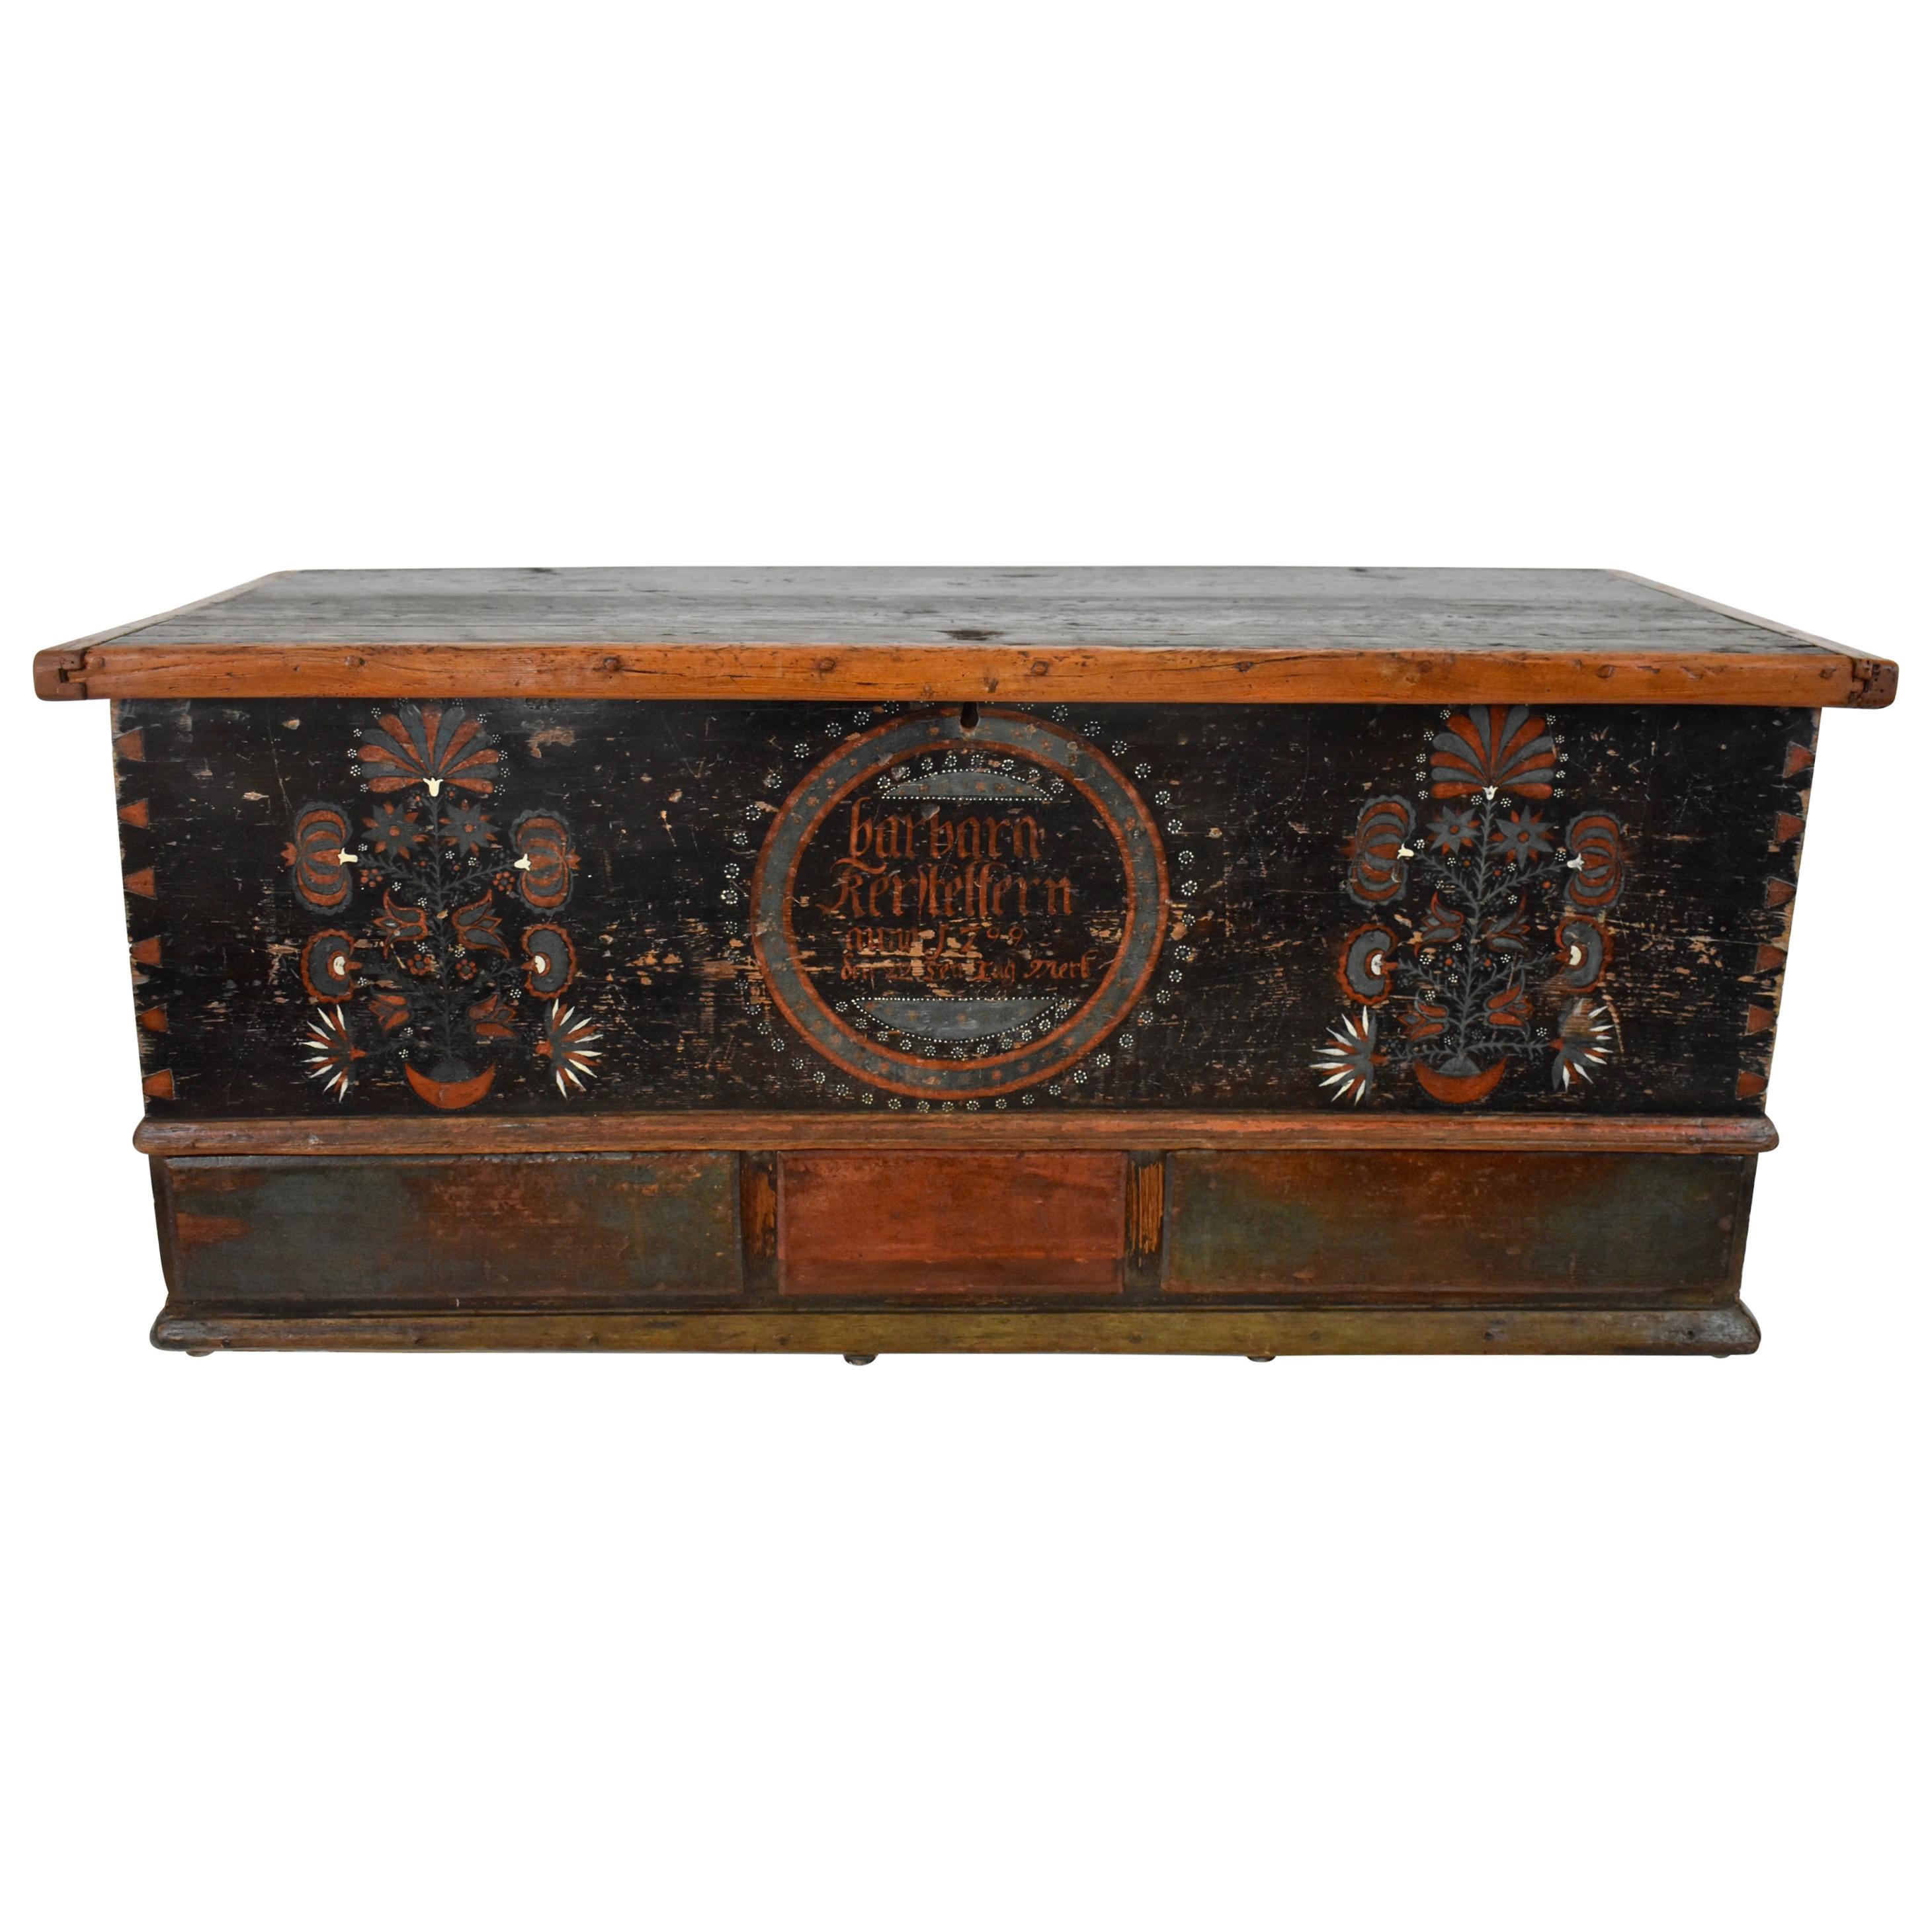 Pennsylvania German Painted and Decorated Chest over Three Drawers